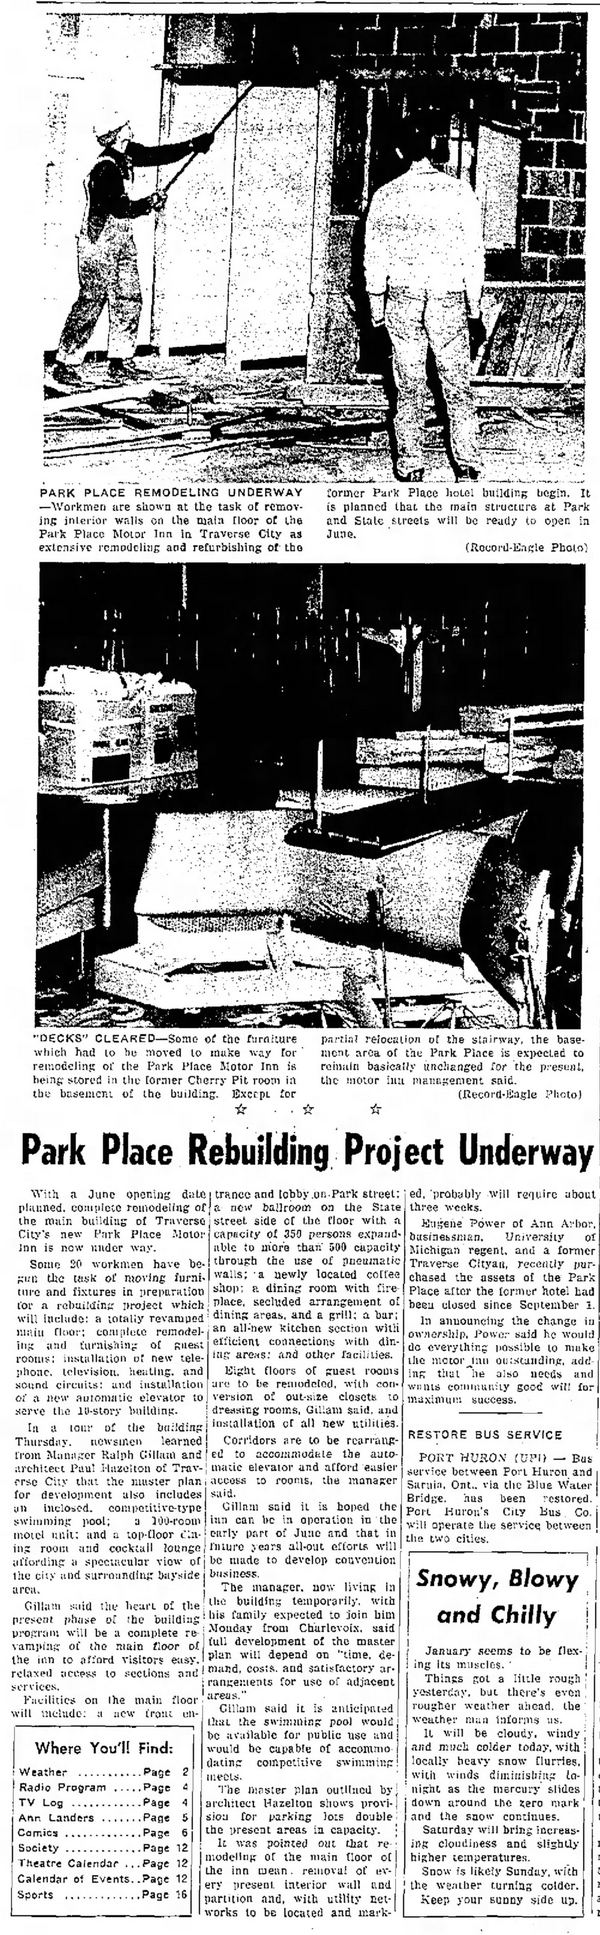 Park Place Hotel (Park Place Motor Inn) - Jan 10 1964 Article On Remodel